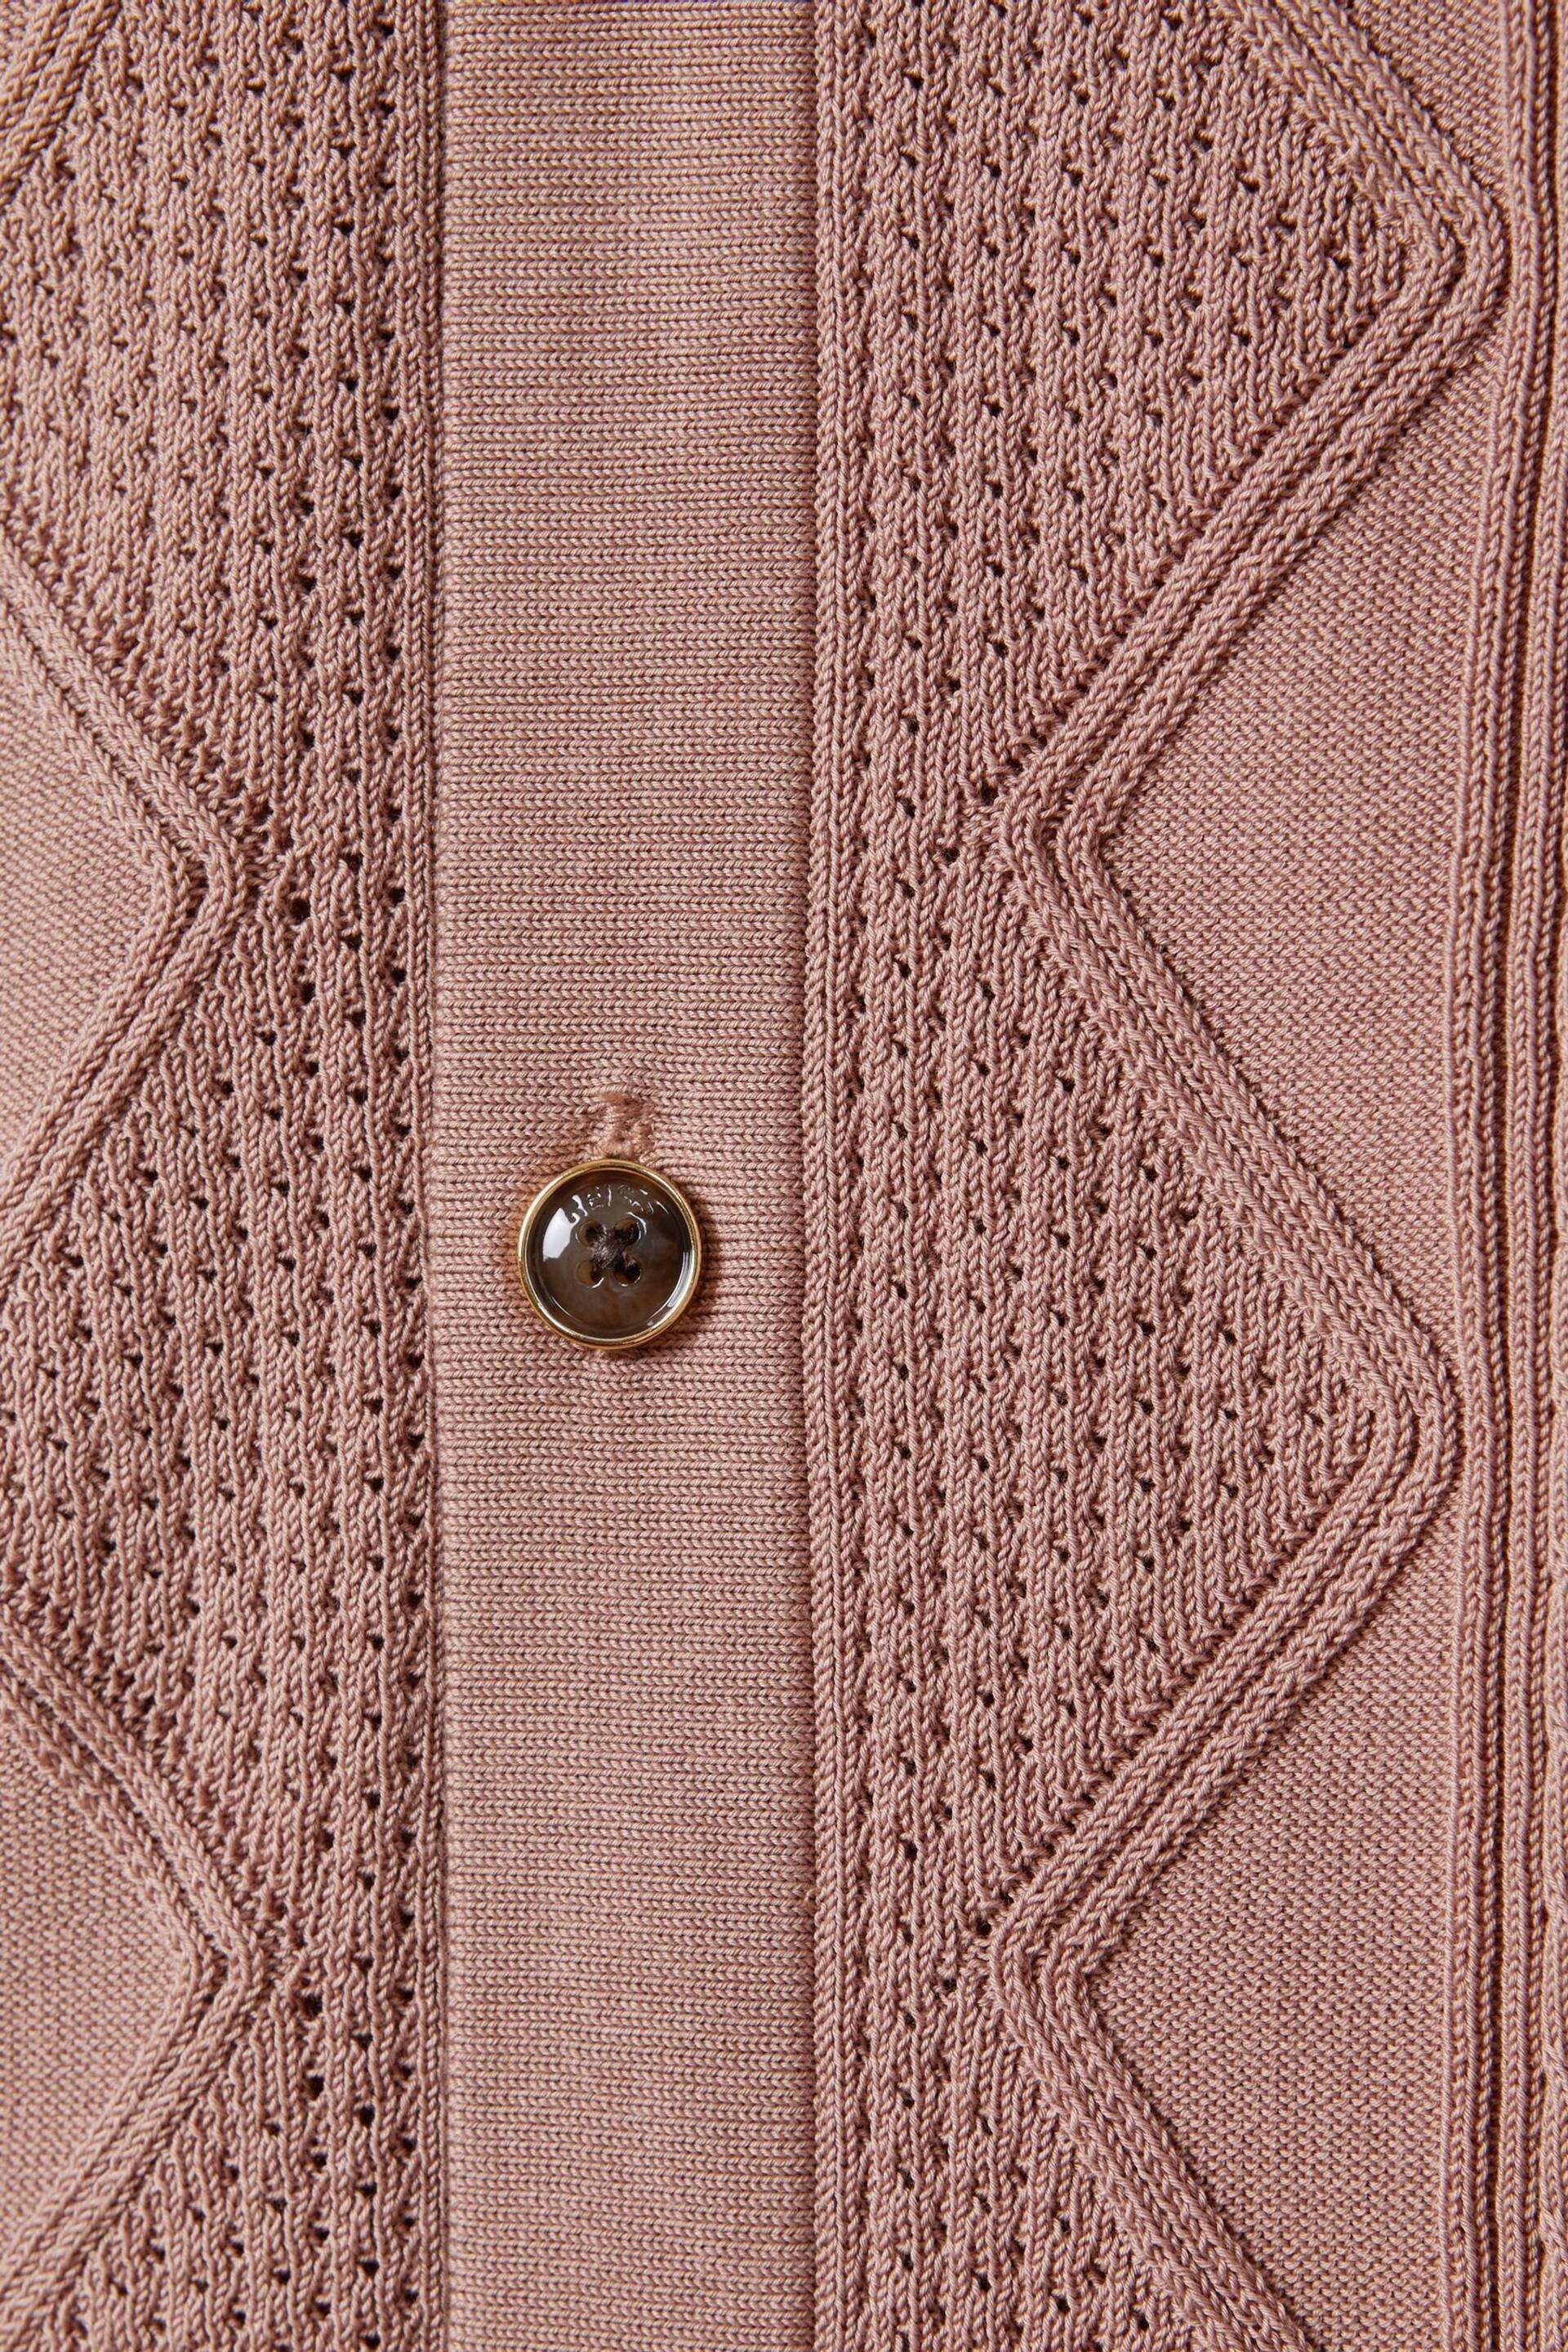 Reiss Rose Fortune Cable Knit Cuban Collar Shirt - Image 6 of 6